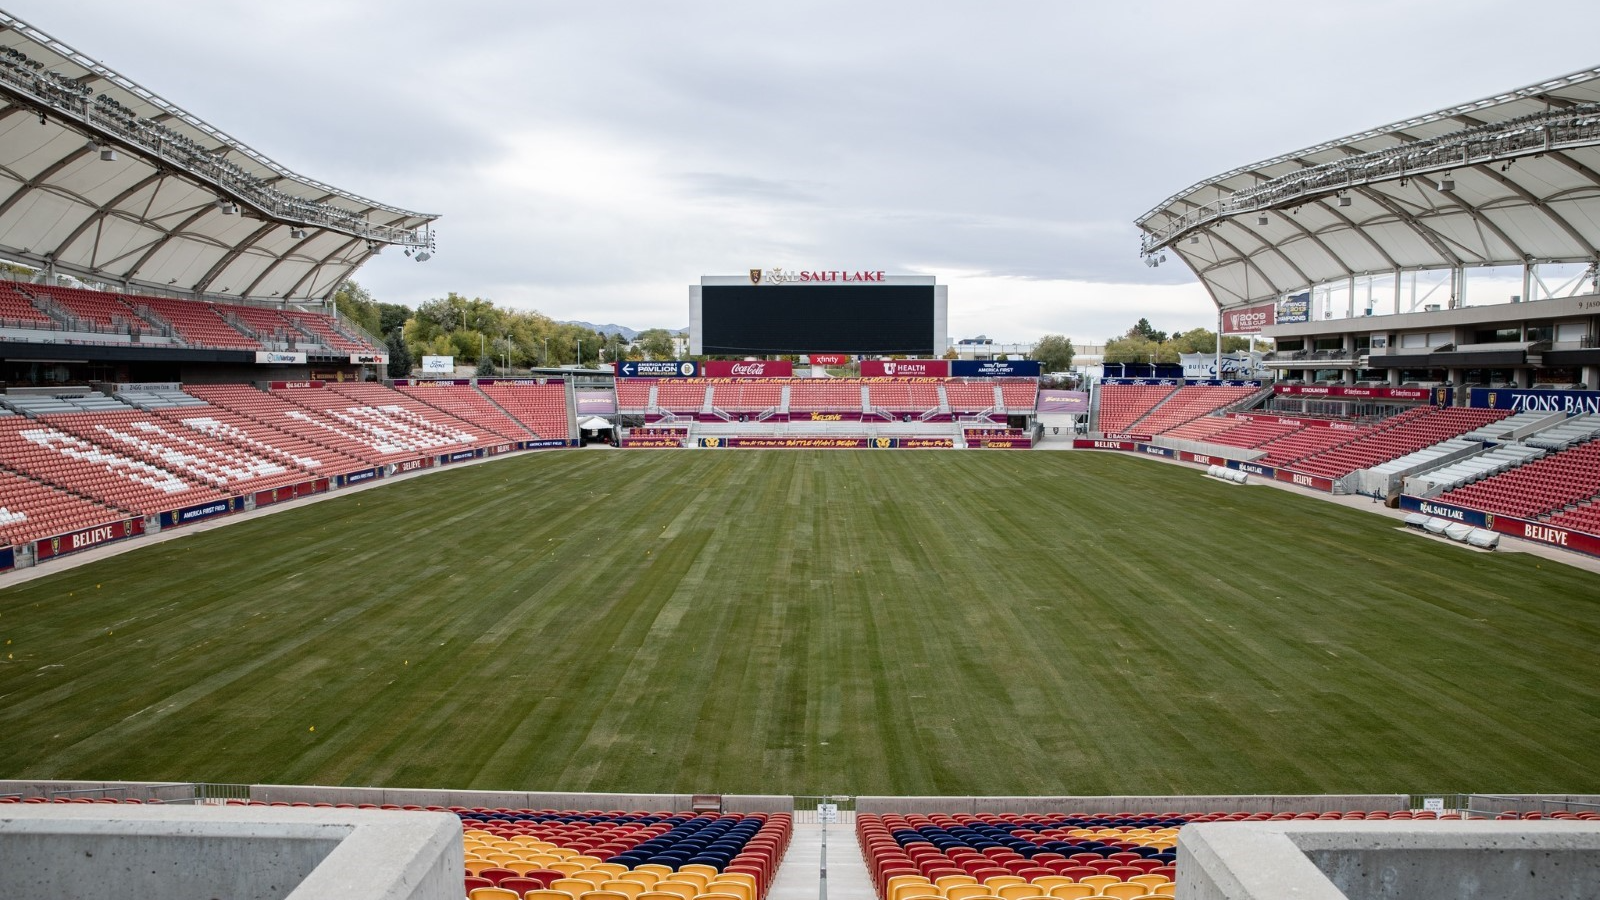 The playing field at American First Field has been replaced with new sod, according to Real Salt La...